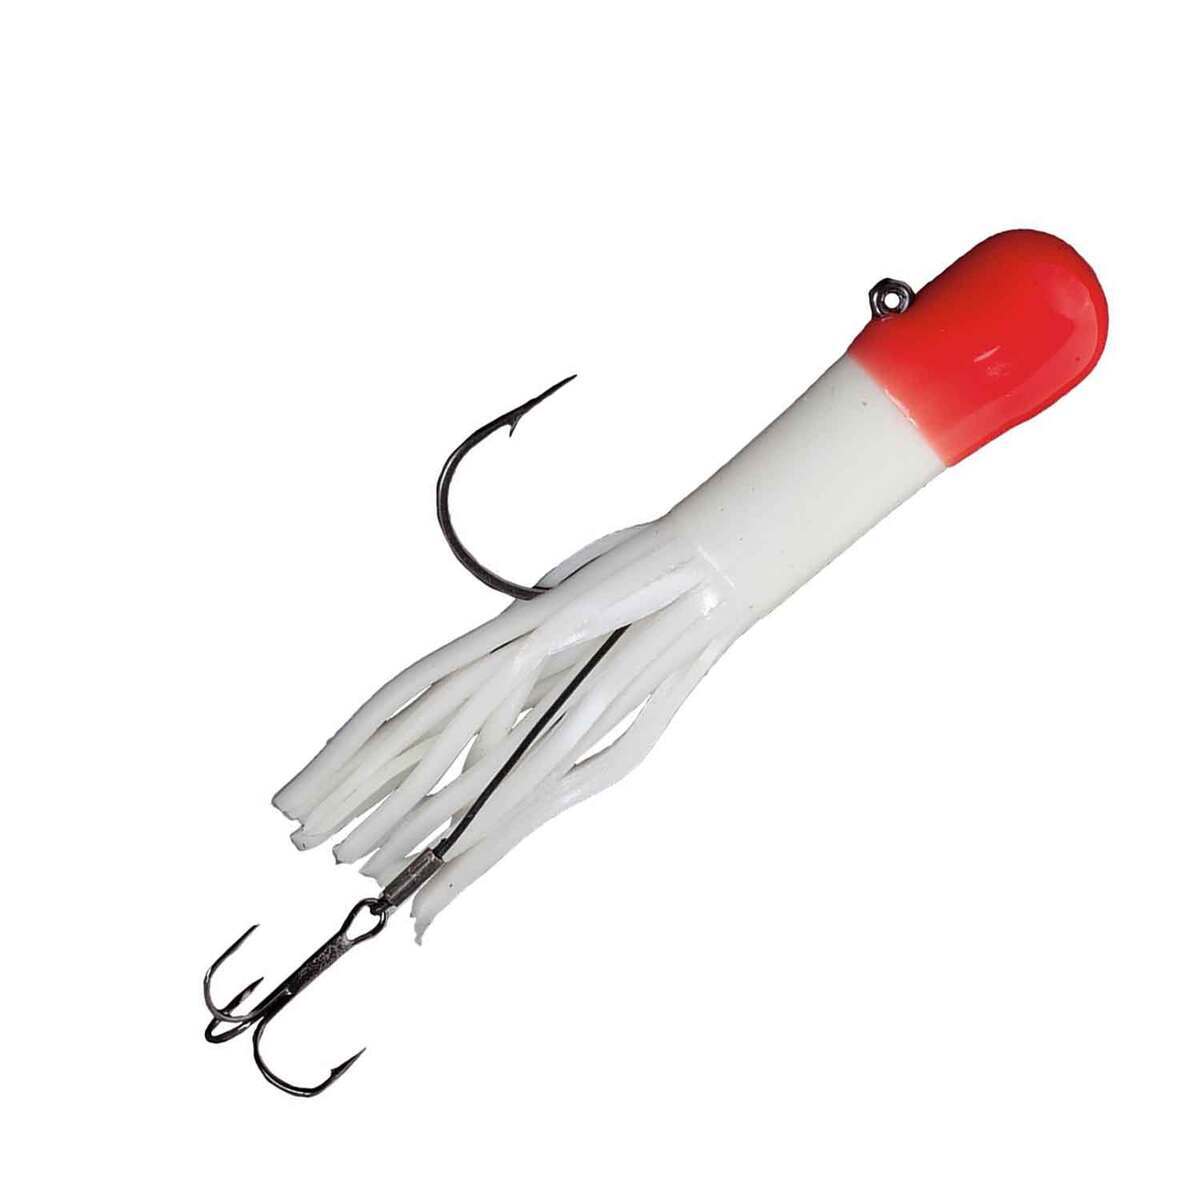 JB Lures Rigged Tube Ice Fishing Lures - White/Red, 5in, 2oz